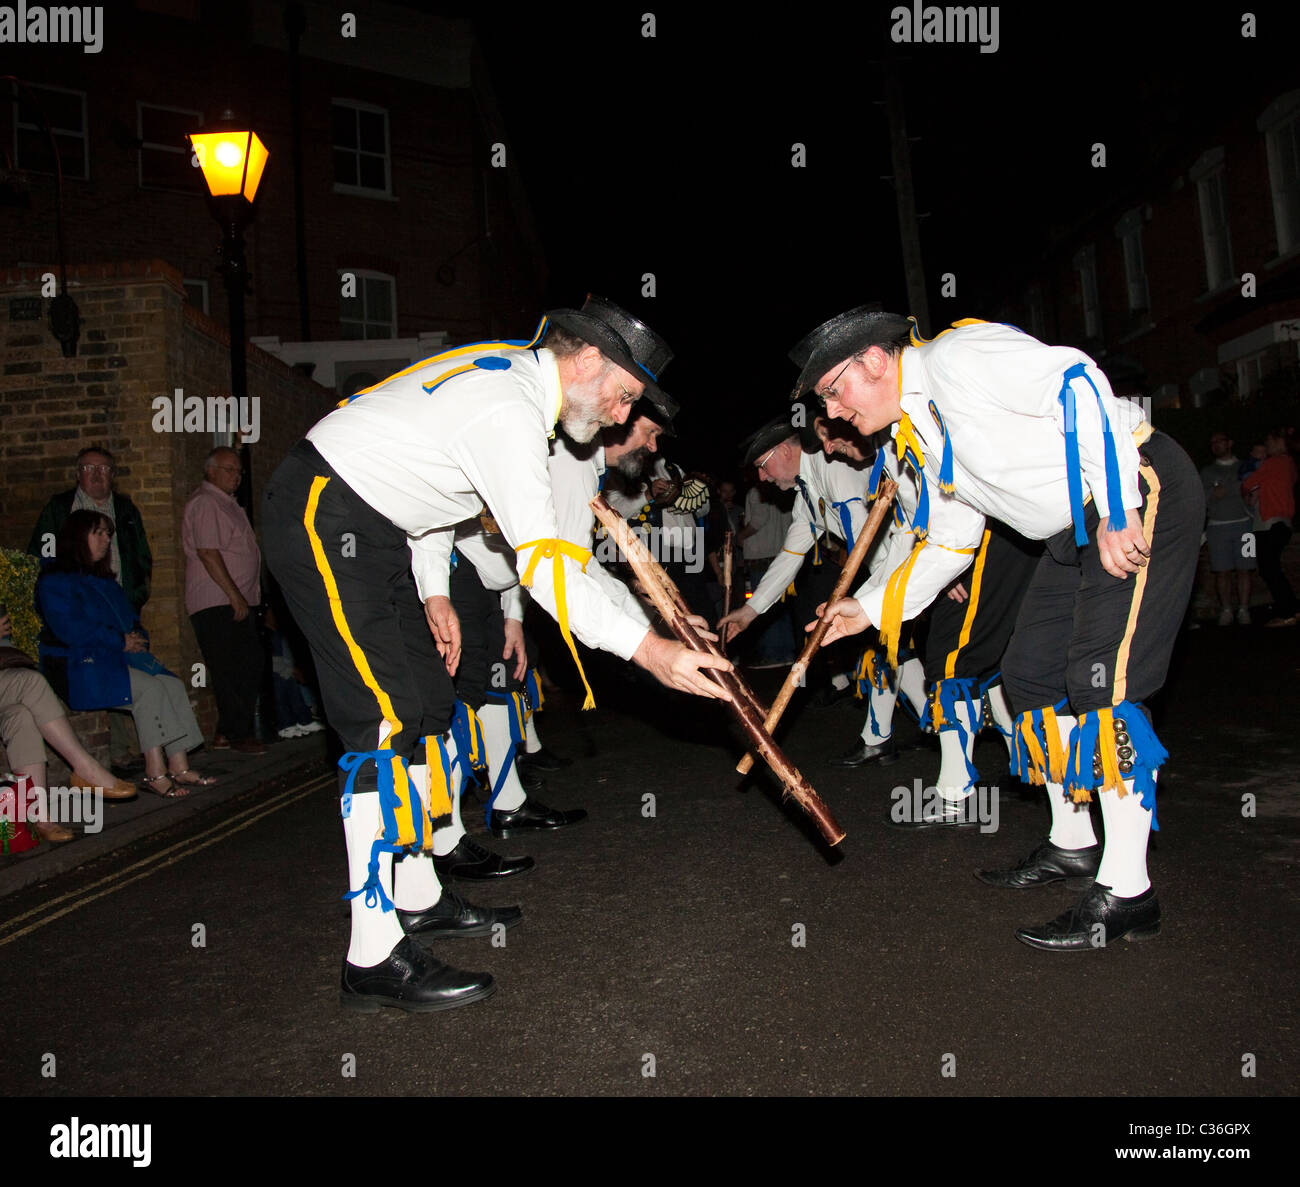 The Ravensbourne Morris Men perform at night outside a pub in North West Kent, UK. Stock Photo